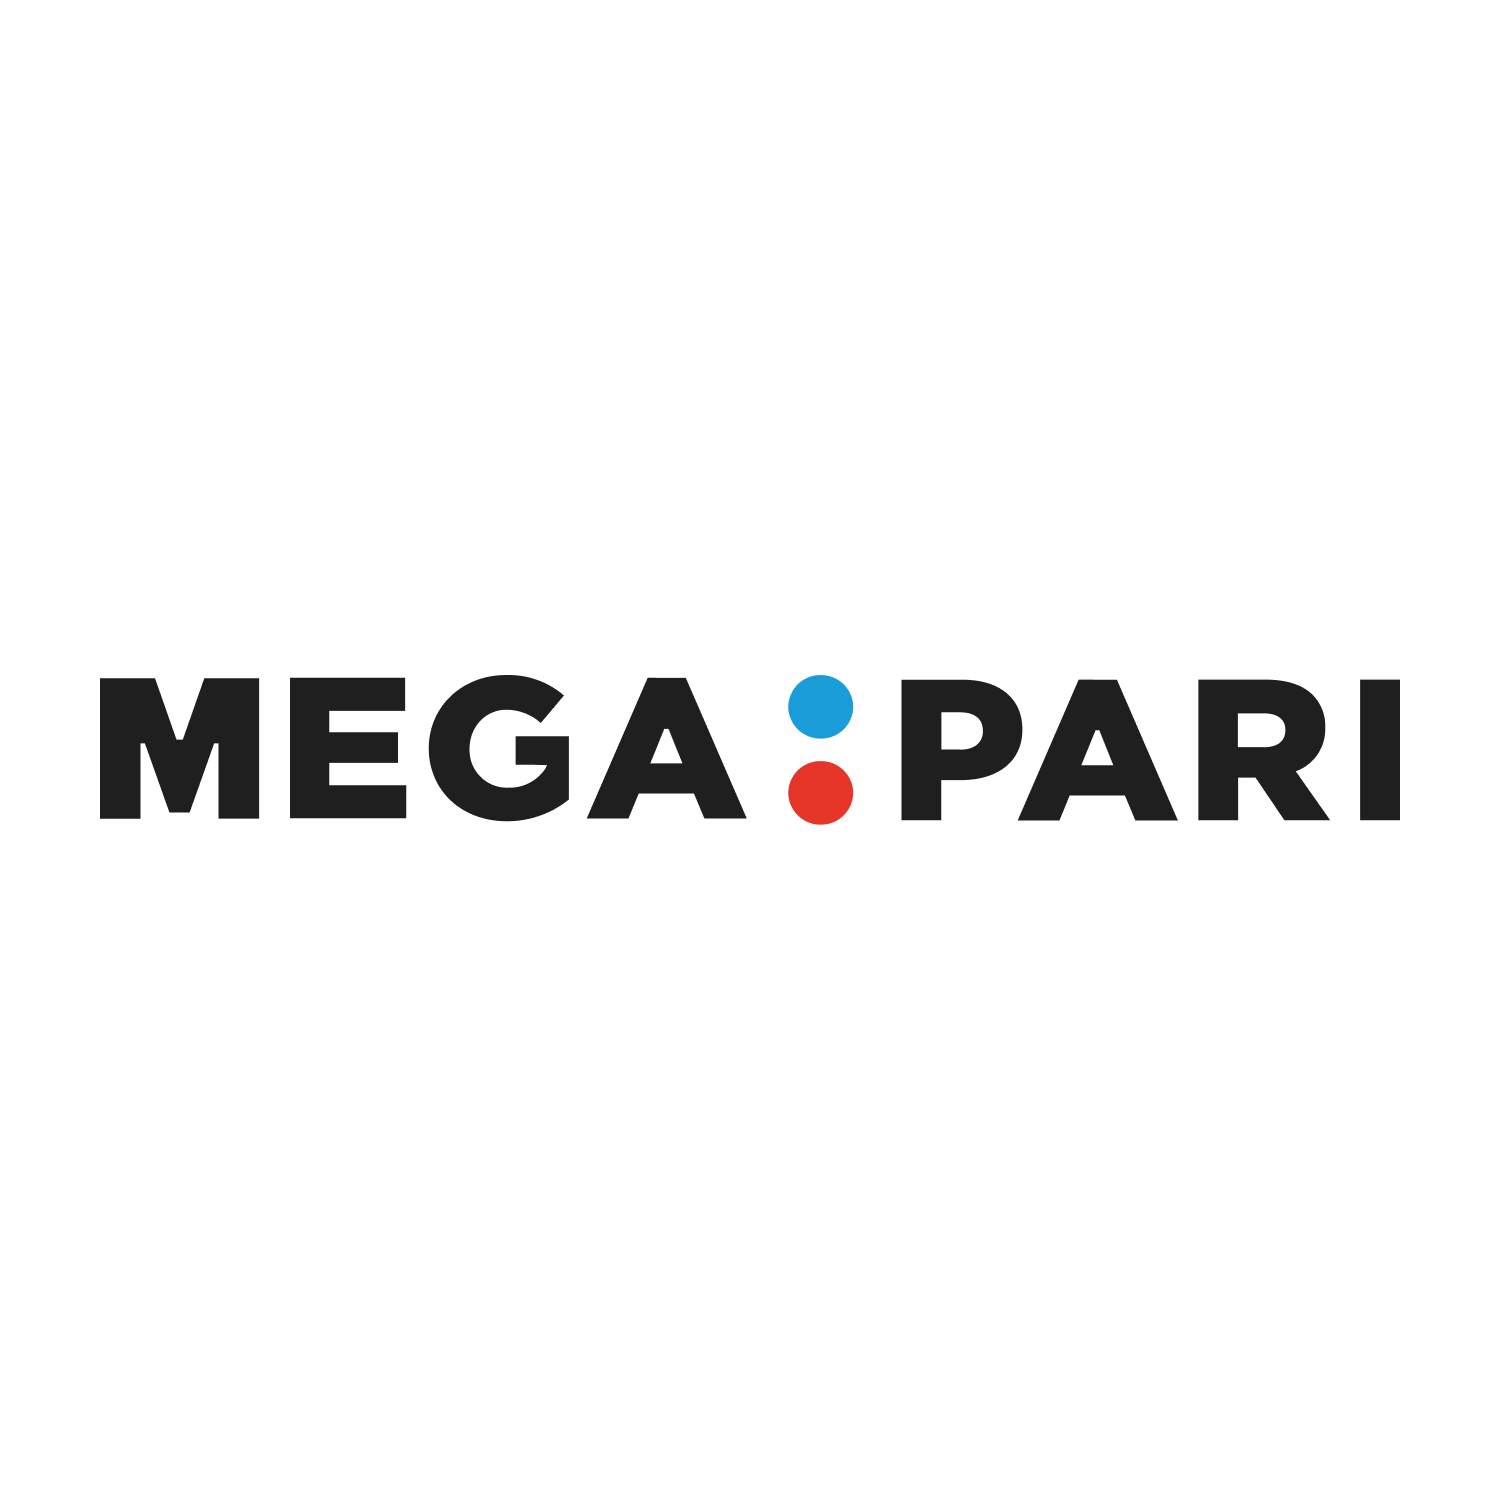 Learn how to bet on cricket and other sports events at the MegaPari site.